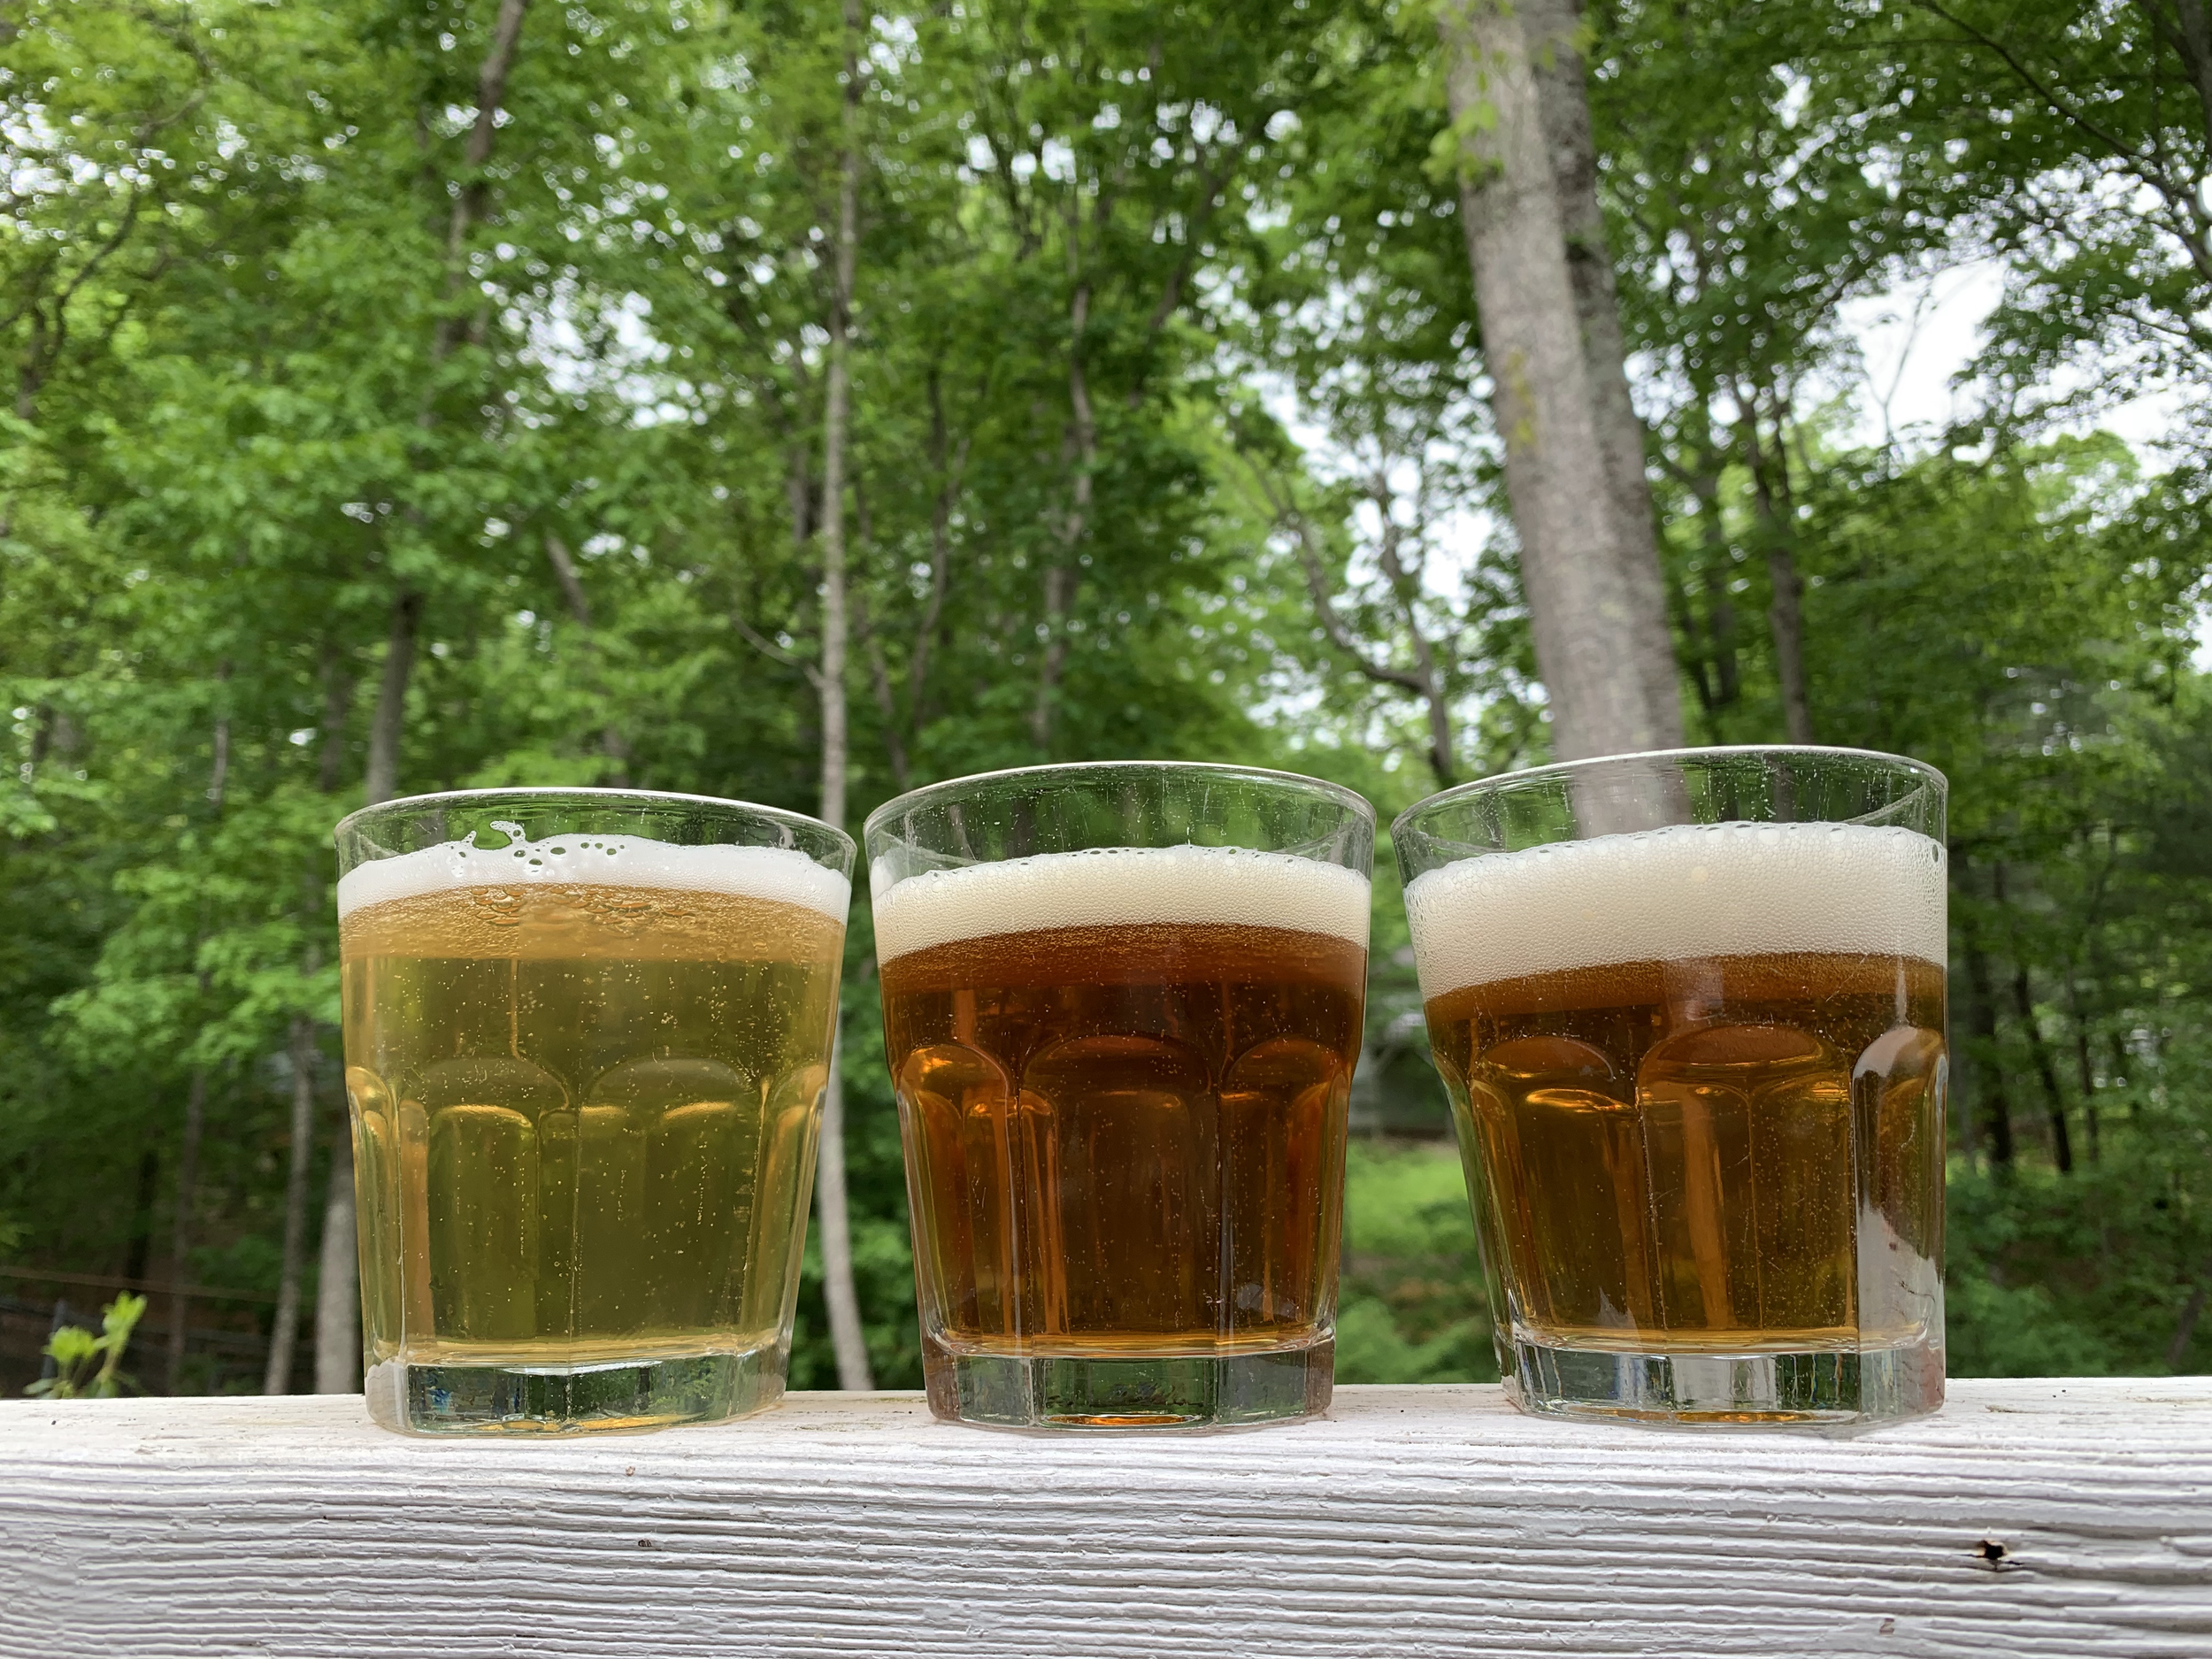  Homebrewed light lager and Vienna lager (left and center), both brewed with Fermentis W-34/70 lager yeast, sparkle alongside Belgian tripel (right) brewed with White Labs WLP500 Monastery Ale Yeast. Finished beer showcases the beneficial partnership